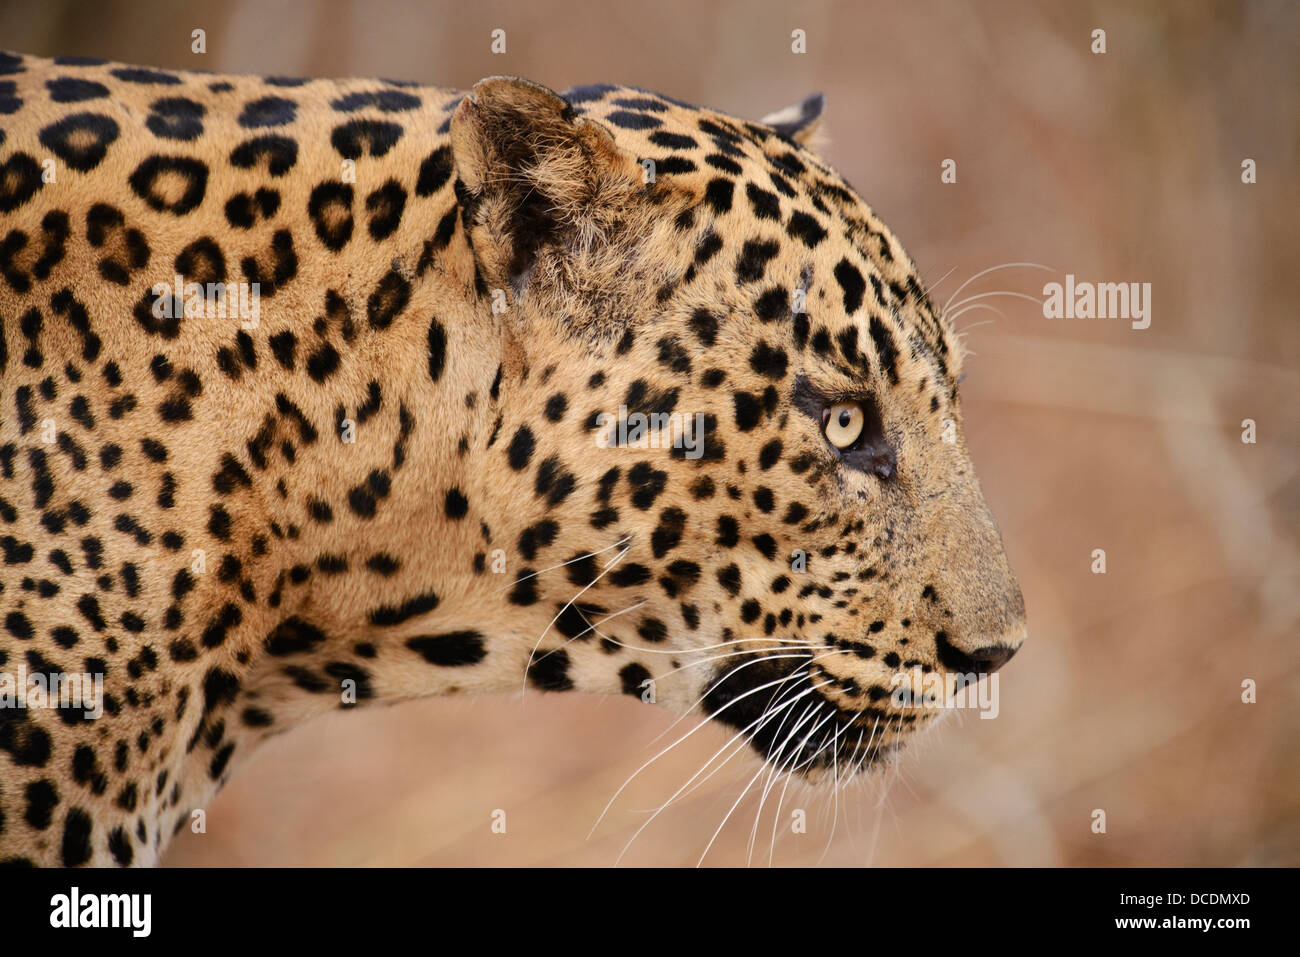 Profile of the face of a leopard on a summer morning patrol in Bandipur Tiger Reserve, Karnataka, India. Stock Photo